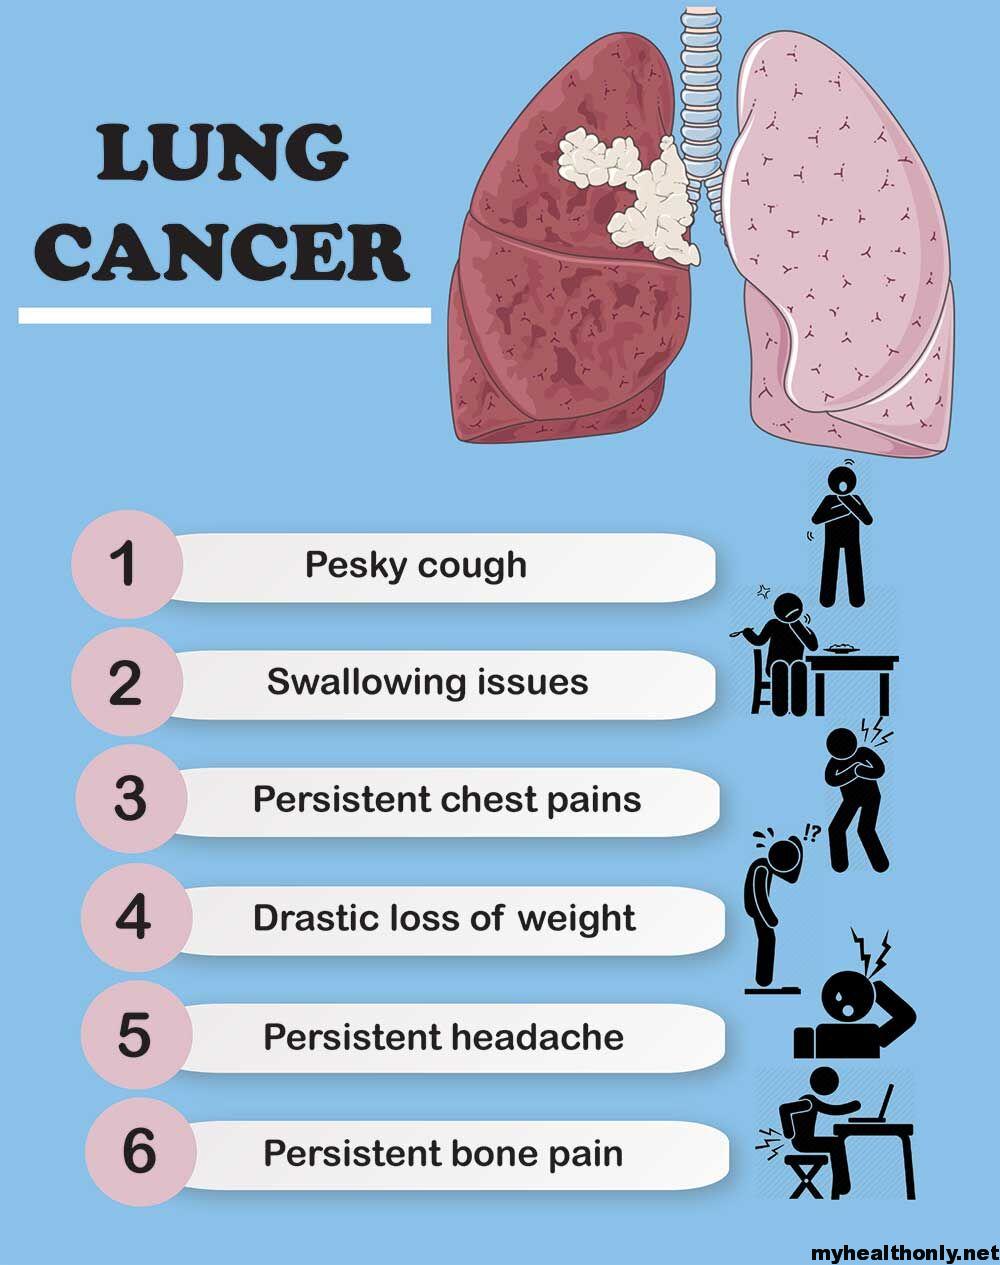 Symptoms of Lung Cancer, Causes, Signs & Risk Factors - My Health Only